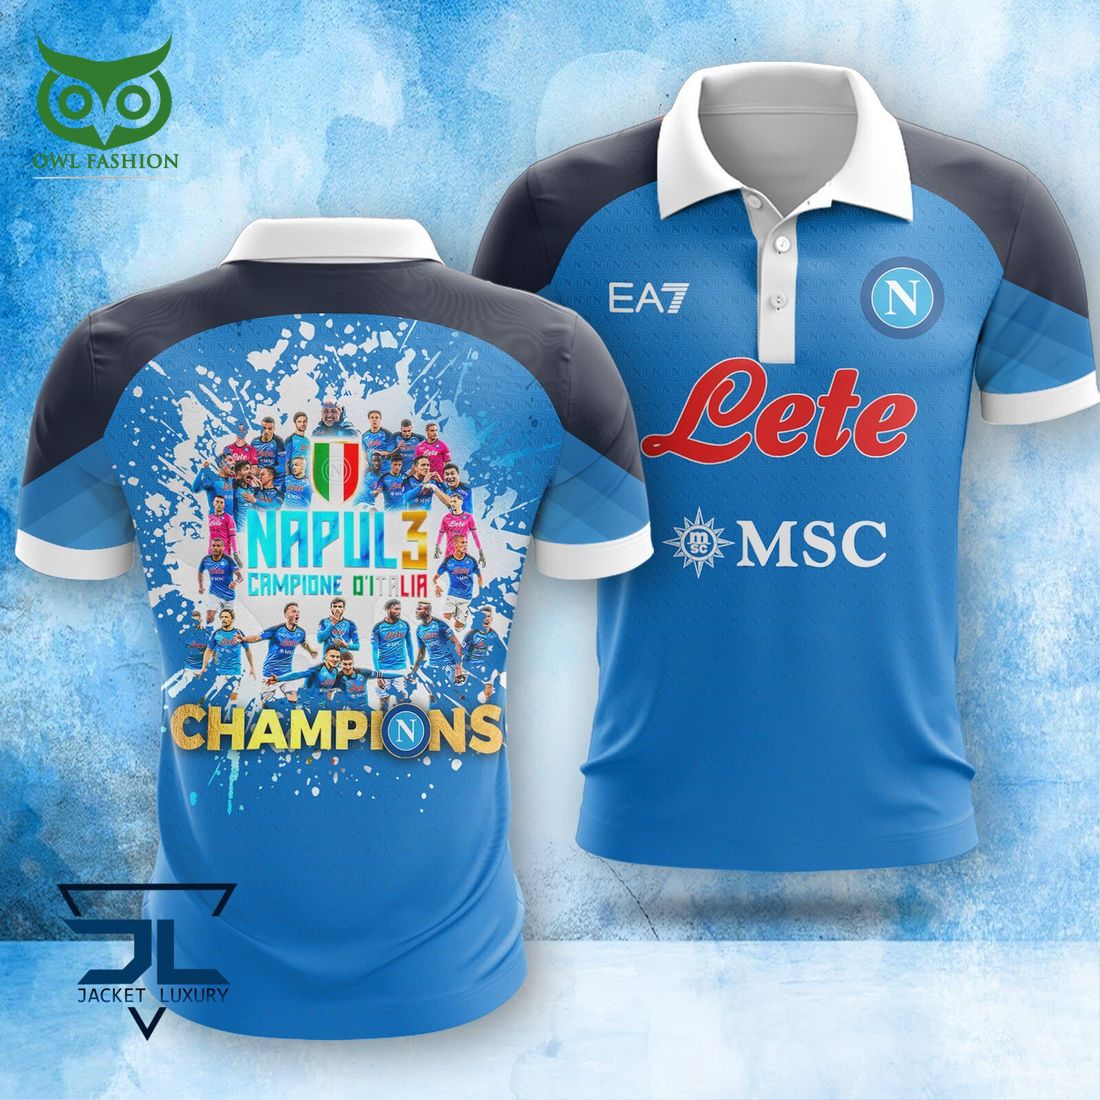 SSC Napoli Campioni d'Italia Serie A Champion 3D Shirt She has grown up know